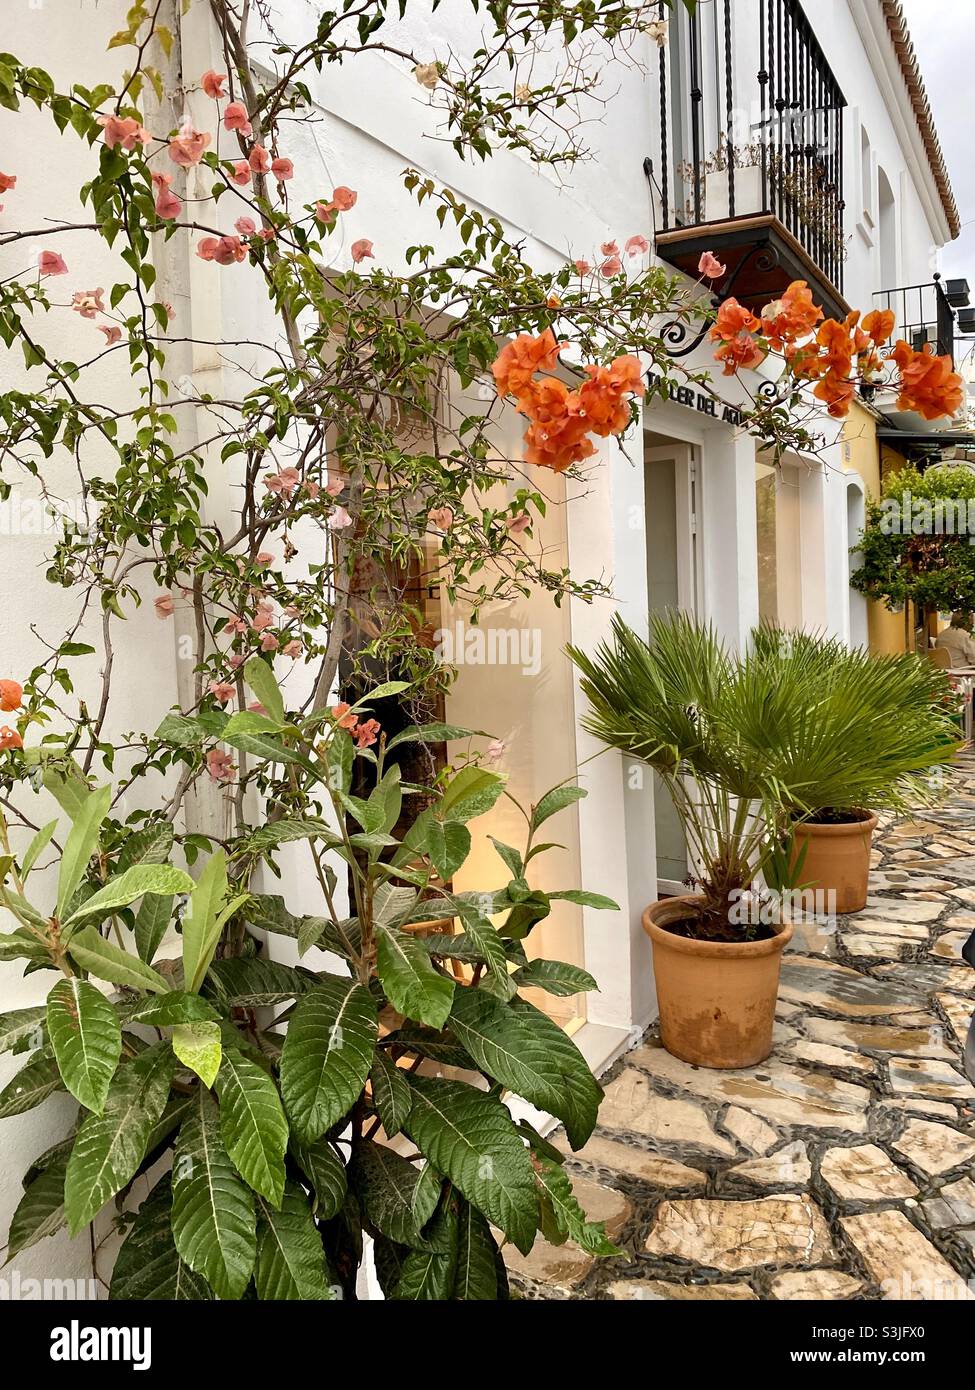 A courtyard in Estepona in southern Spain with flowers and plants Stock Photo